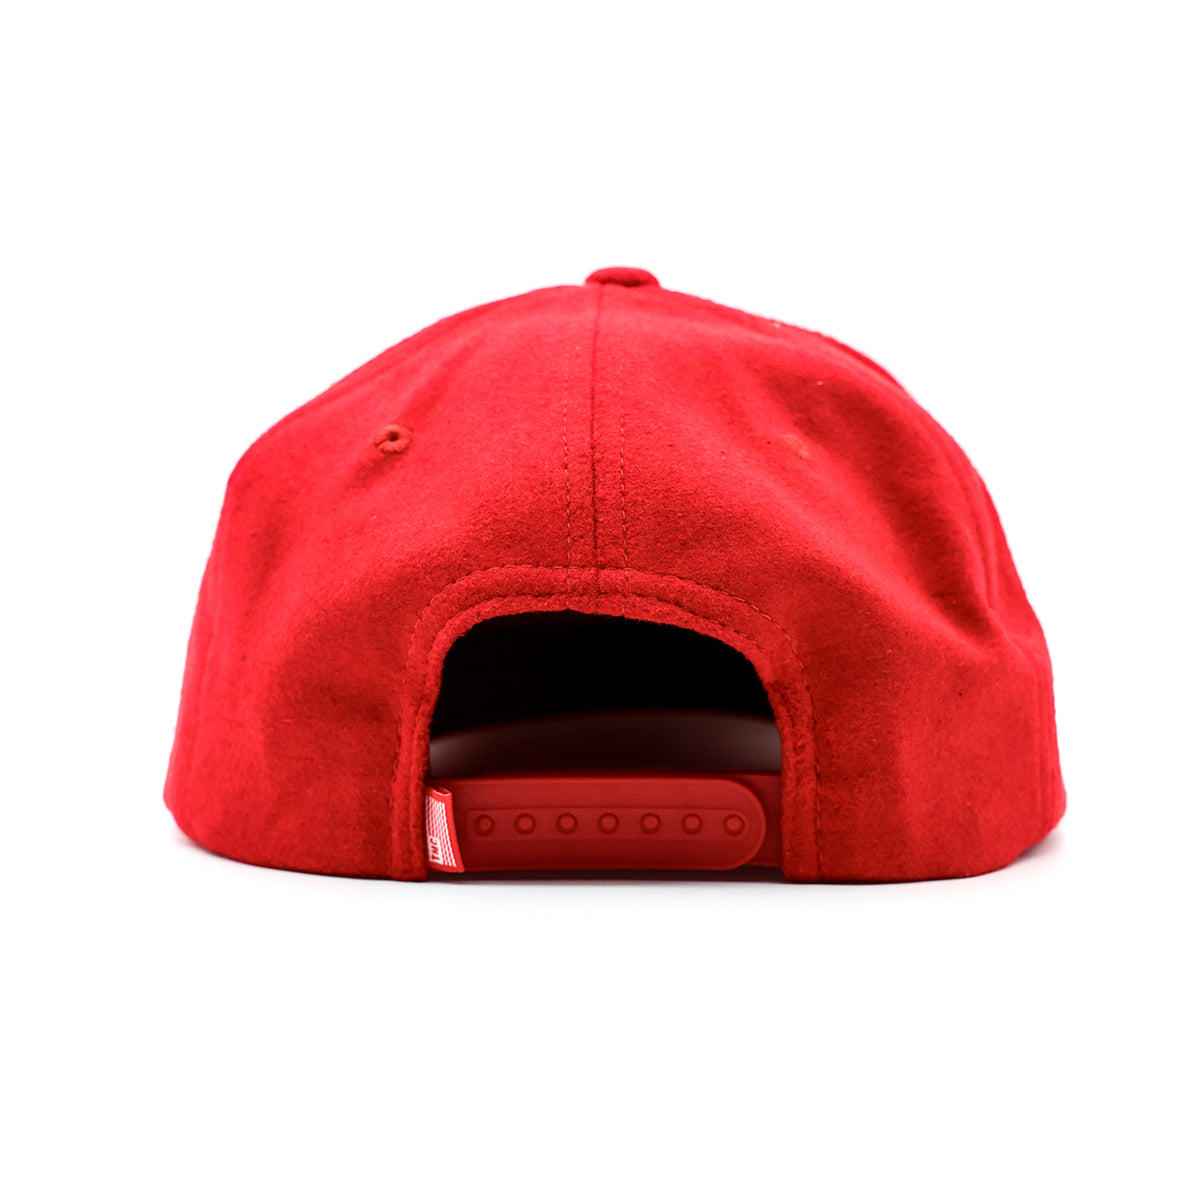 TMC Flag Limited Edition Snapback - Red - Back